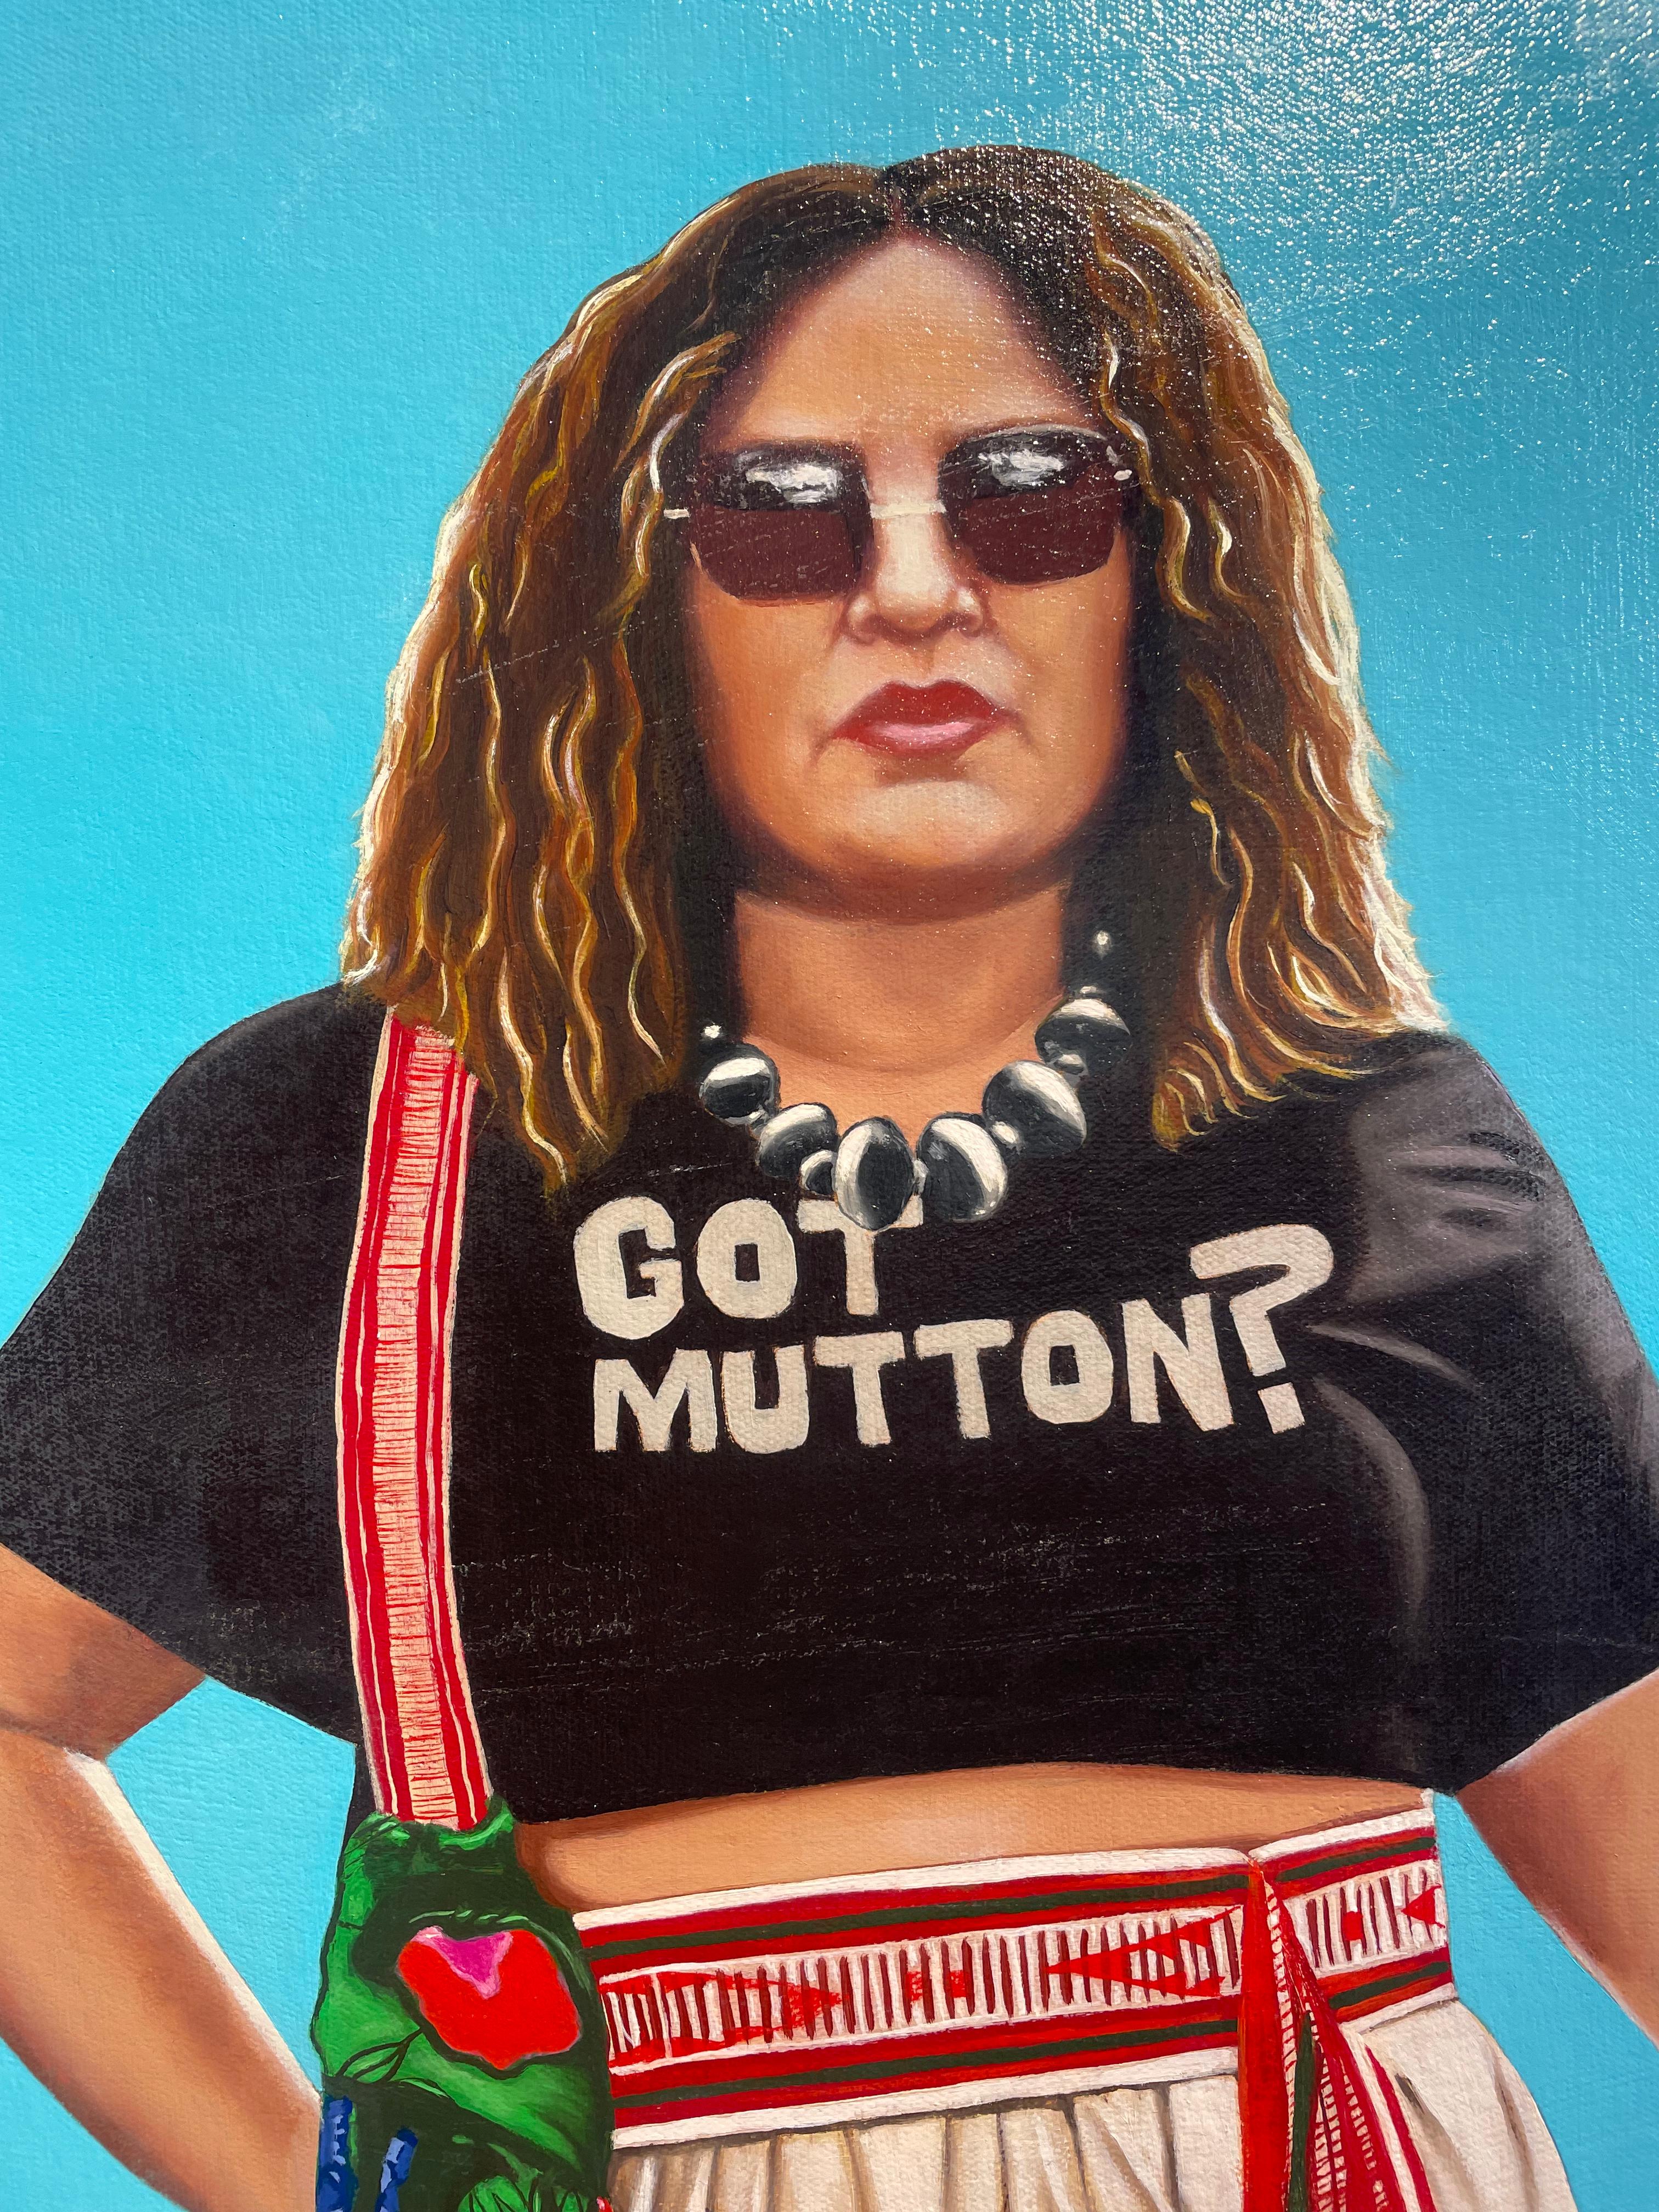 Got Mutton?  - Painting by Avis Charley